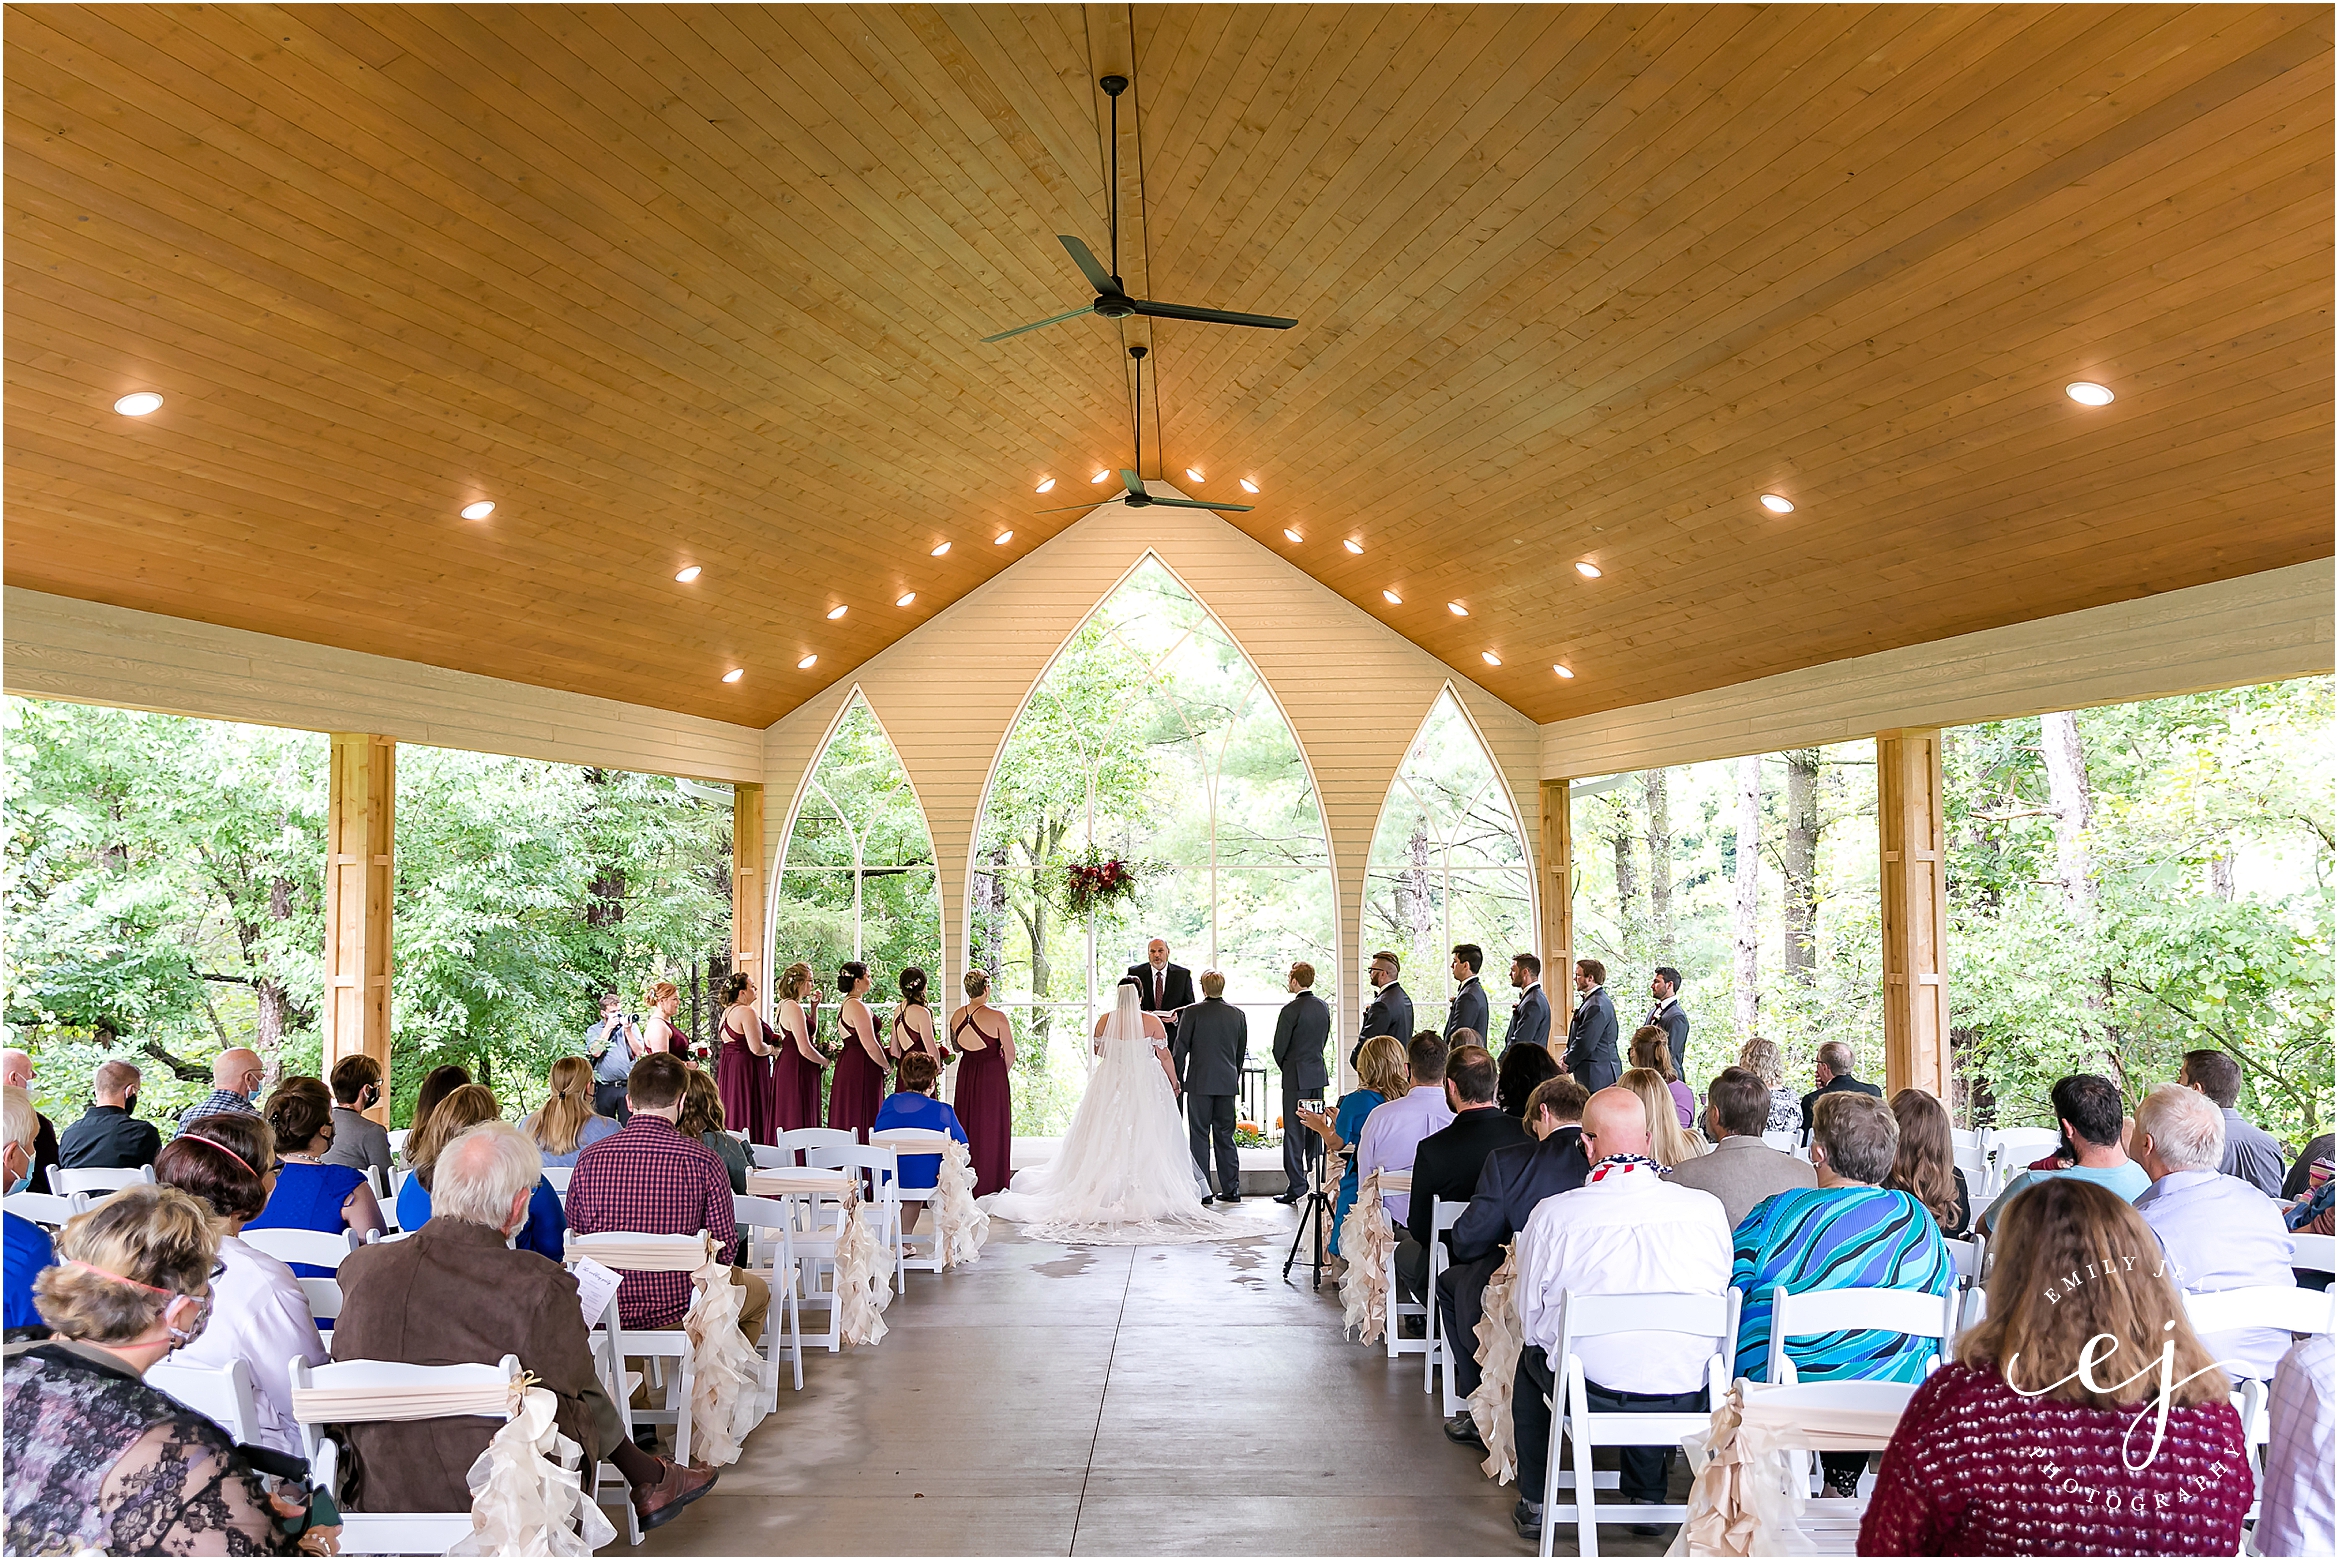 open air chapel at winnebago springs wedding venue in caledonia minnesota full view of the ceremony site